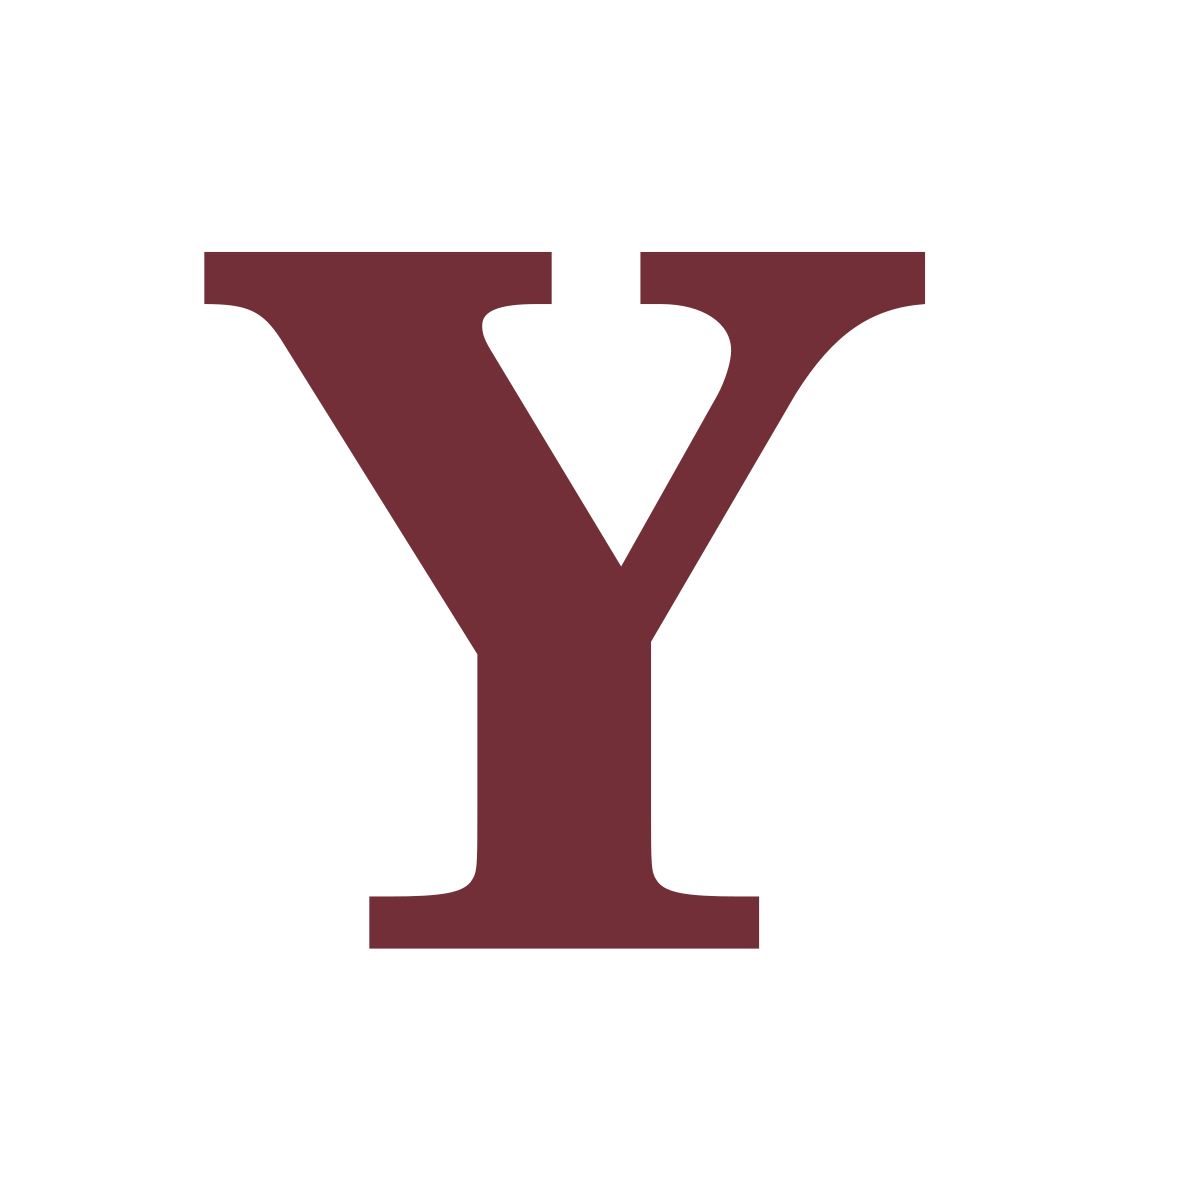 The Y letter in wine color. It's the logo of this personal website.